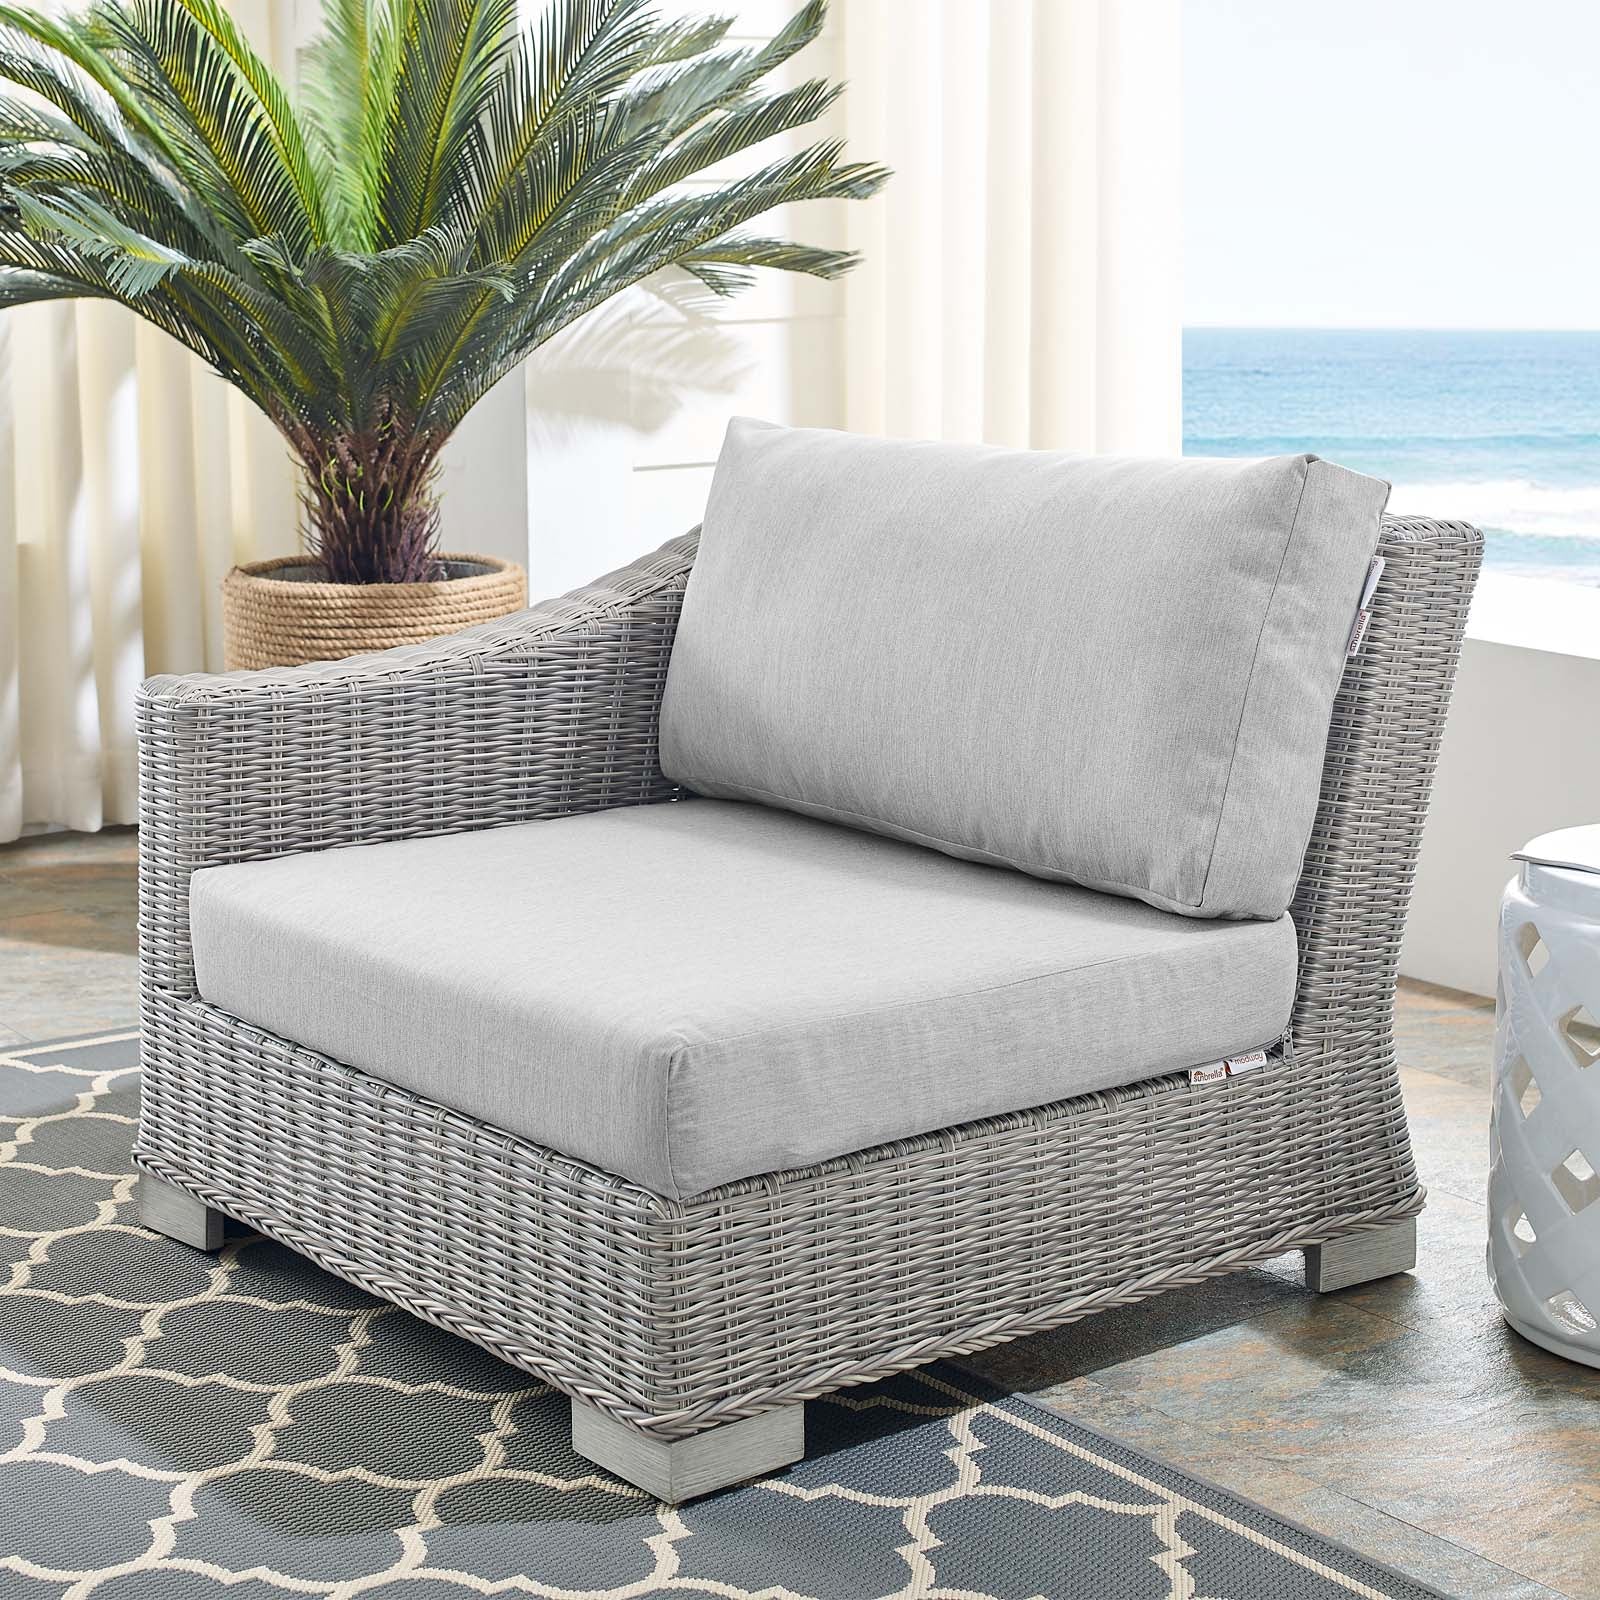 Conway Sunbrella® Outdoor Patio Wicker Rattan Left-Arm Chair - East Shore Modern Home Furnishings